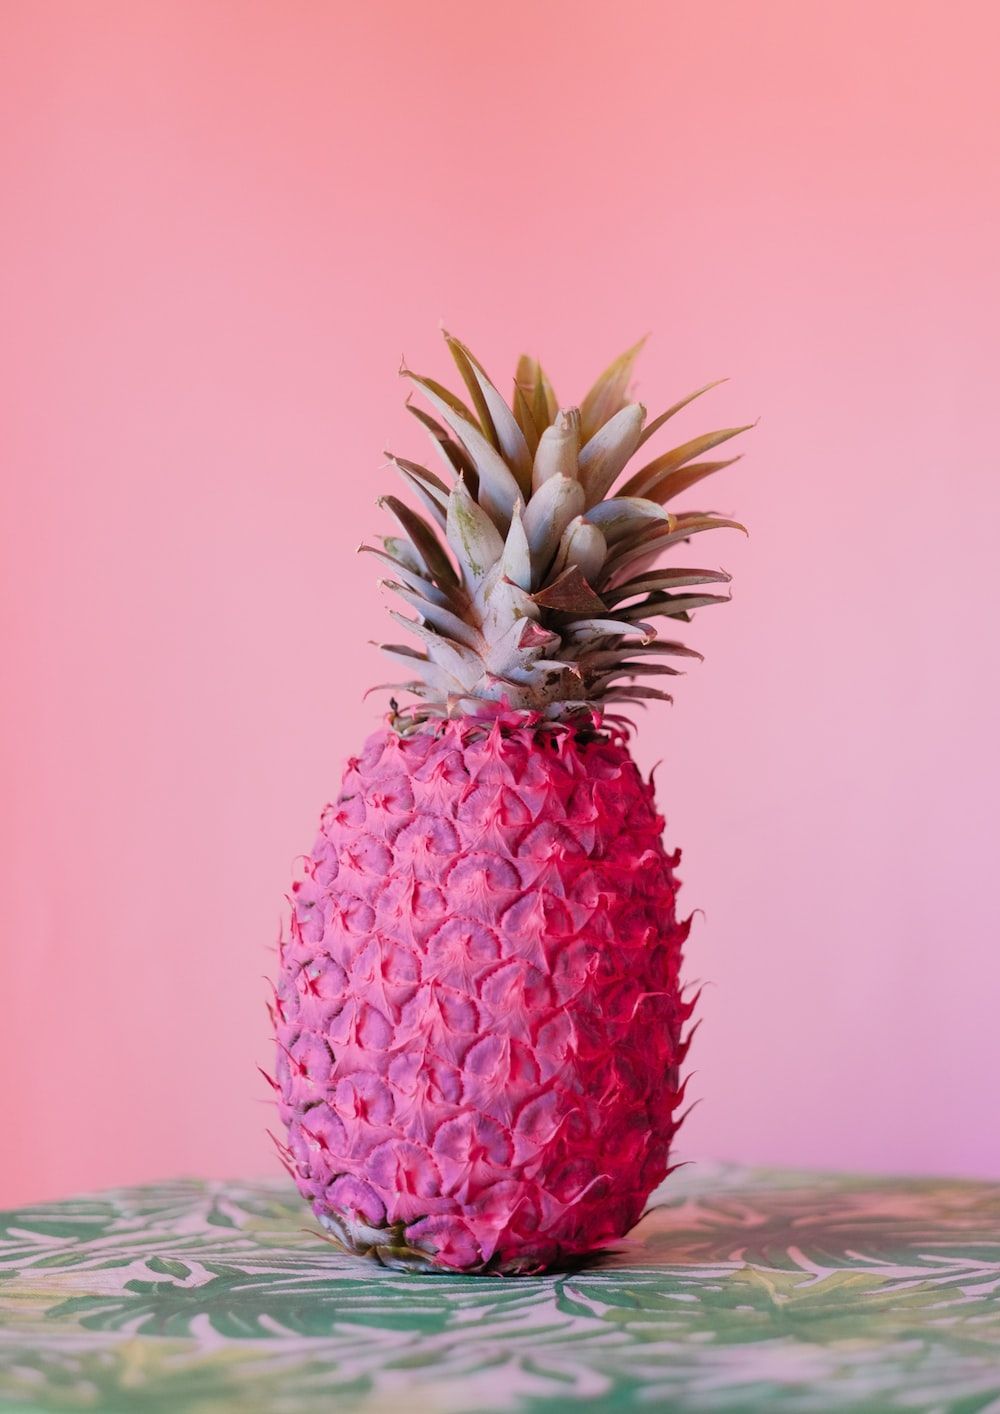 Pink Pineapple Picture. Download Free Image